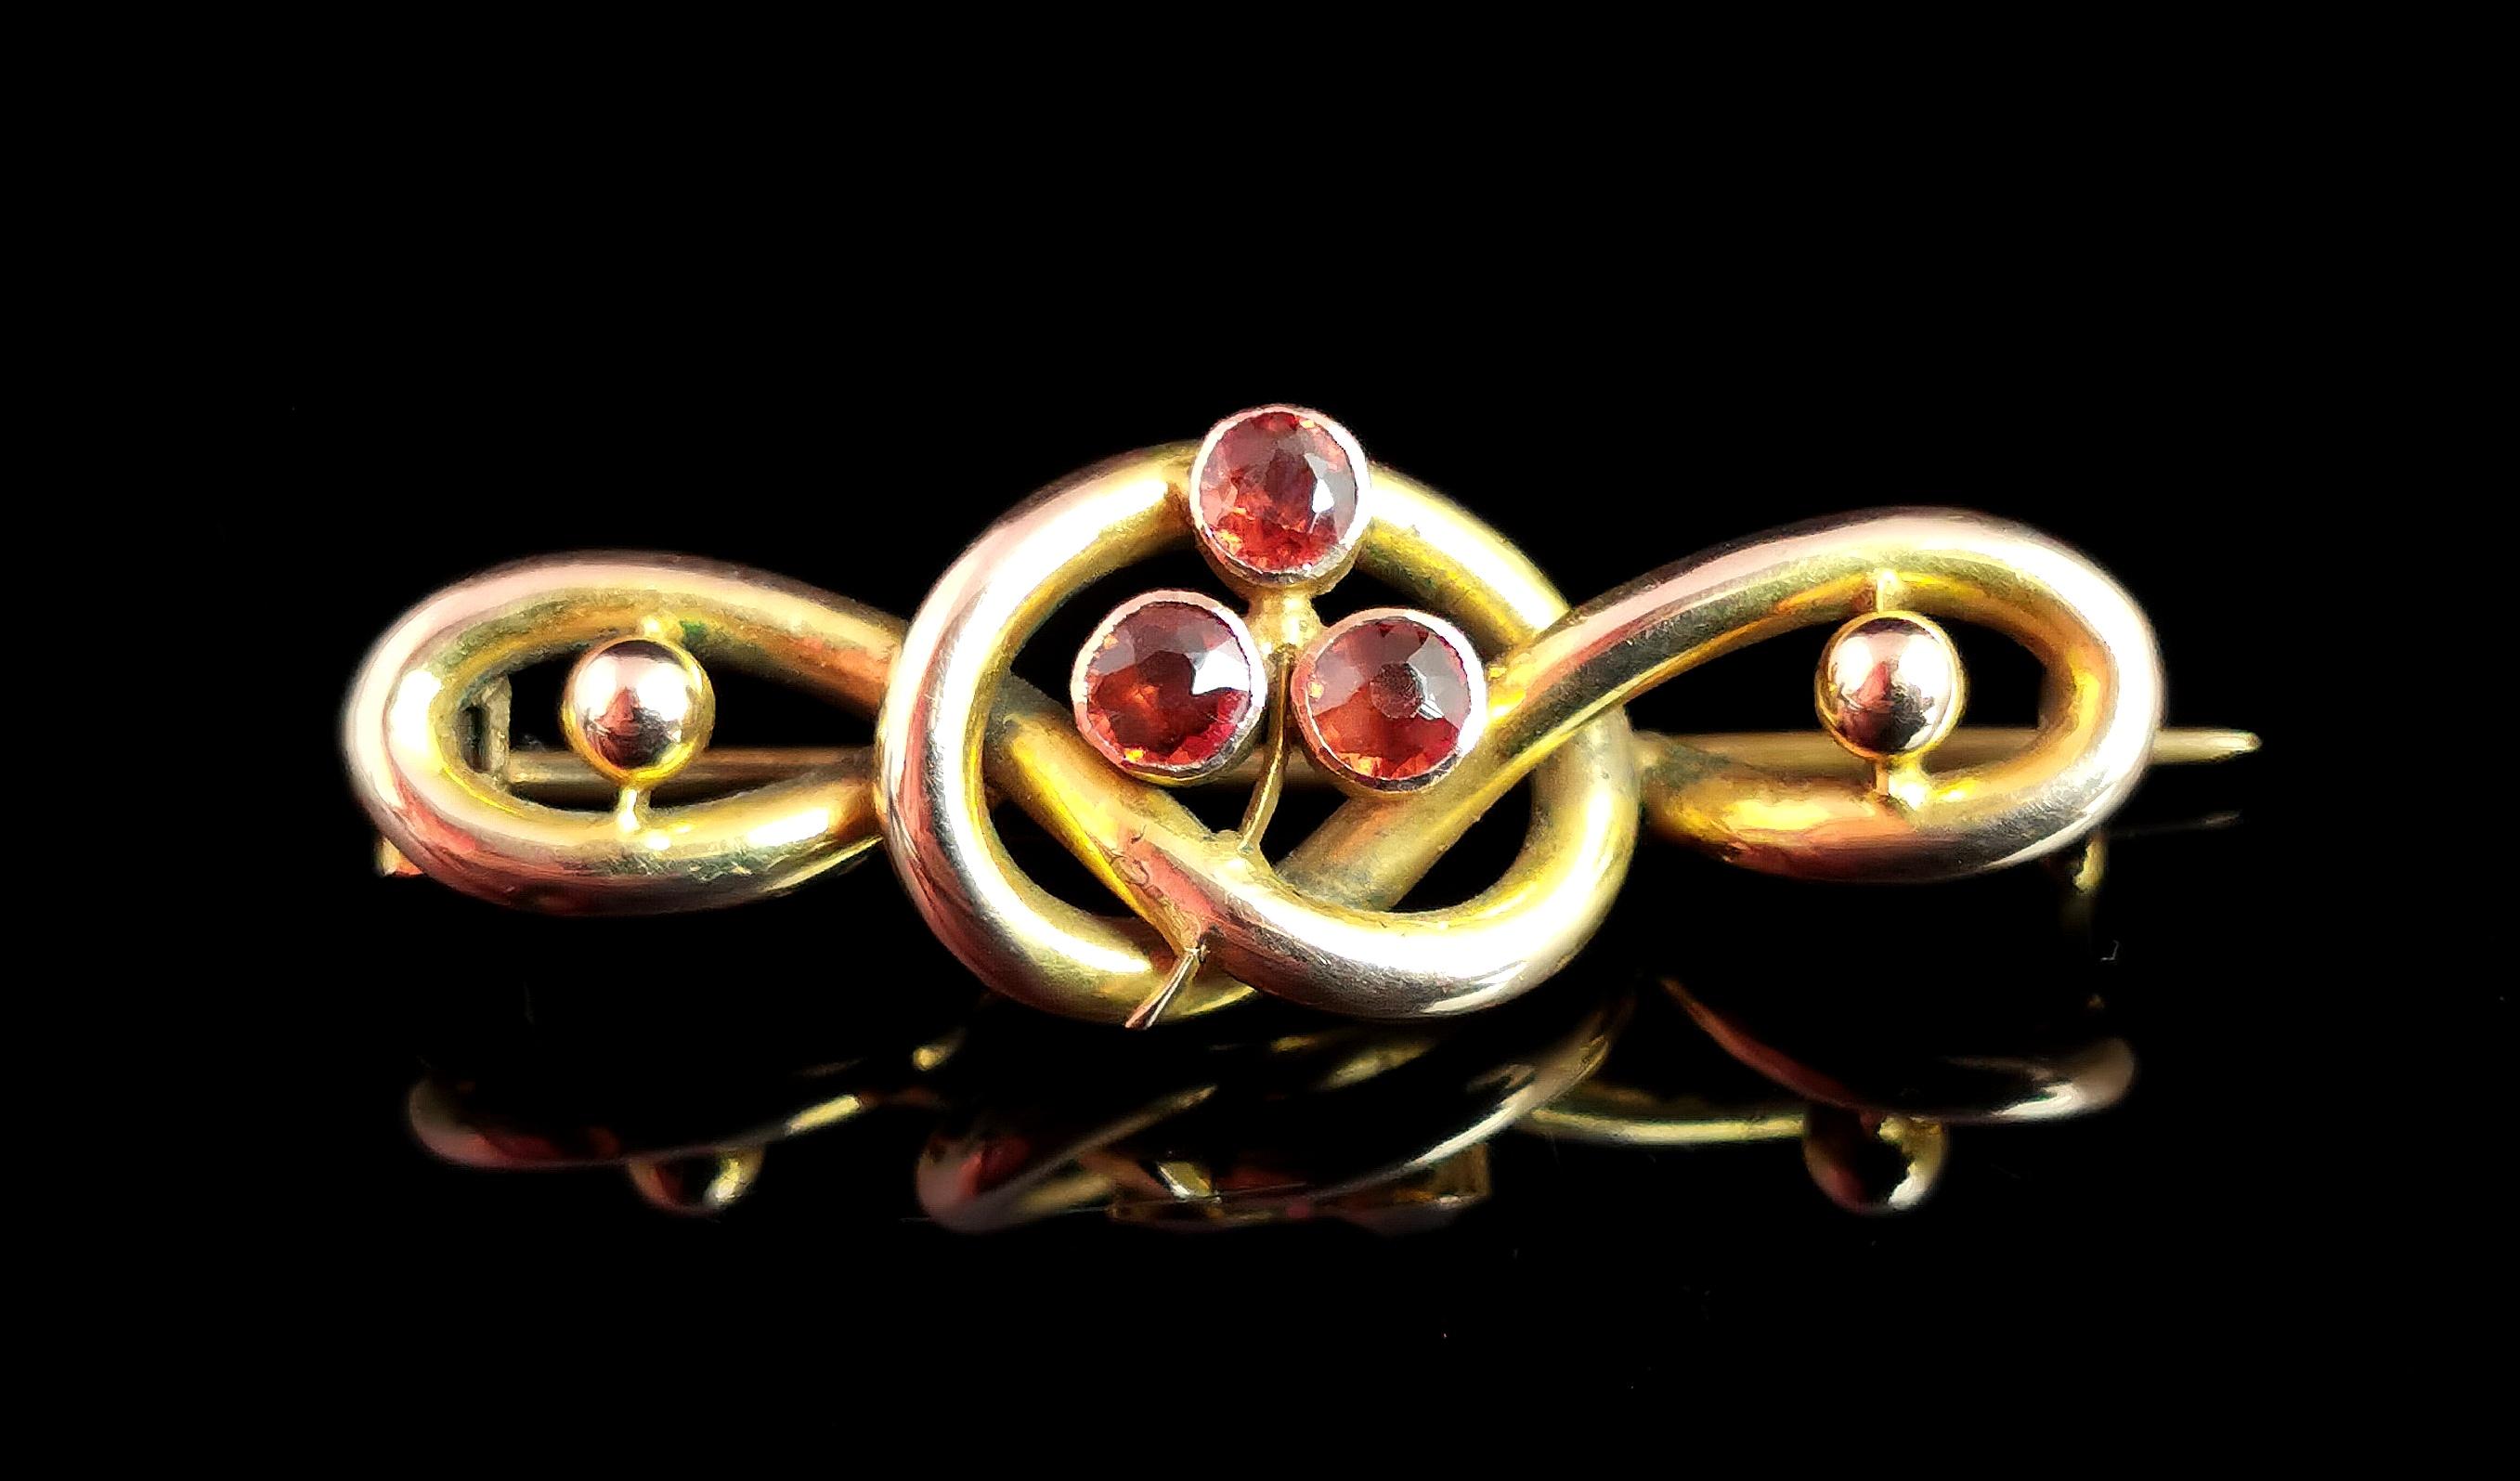 A superb antique, late Victorian shamrock and knot brooch.

Rich bloomed 9kt gold loops which swirl into a lovers knot in the centre provide the body of this brooch.

Combining two powerful symbols in jewellery the lovers knot is adorned with a